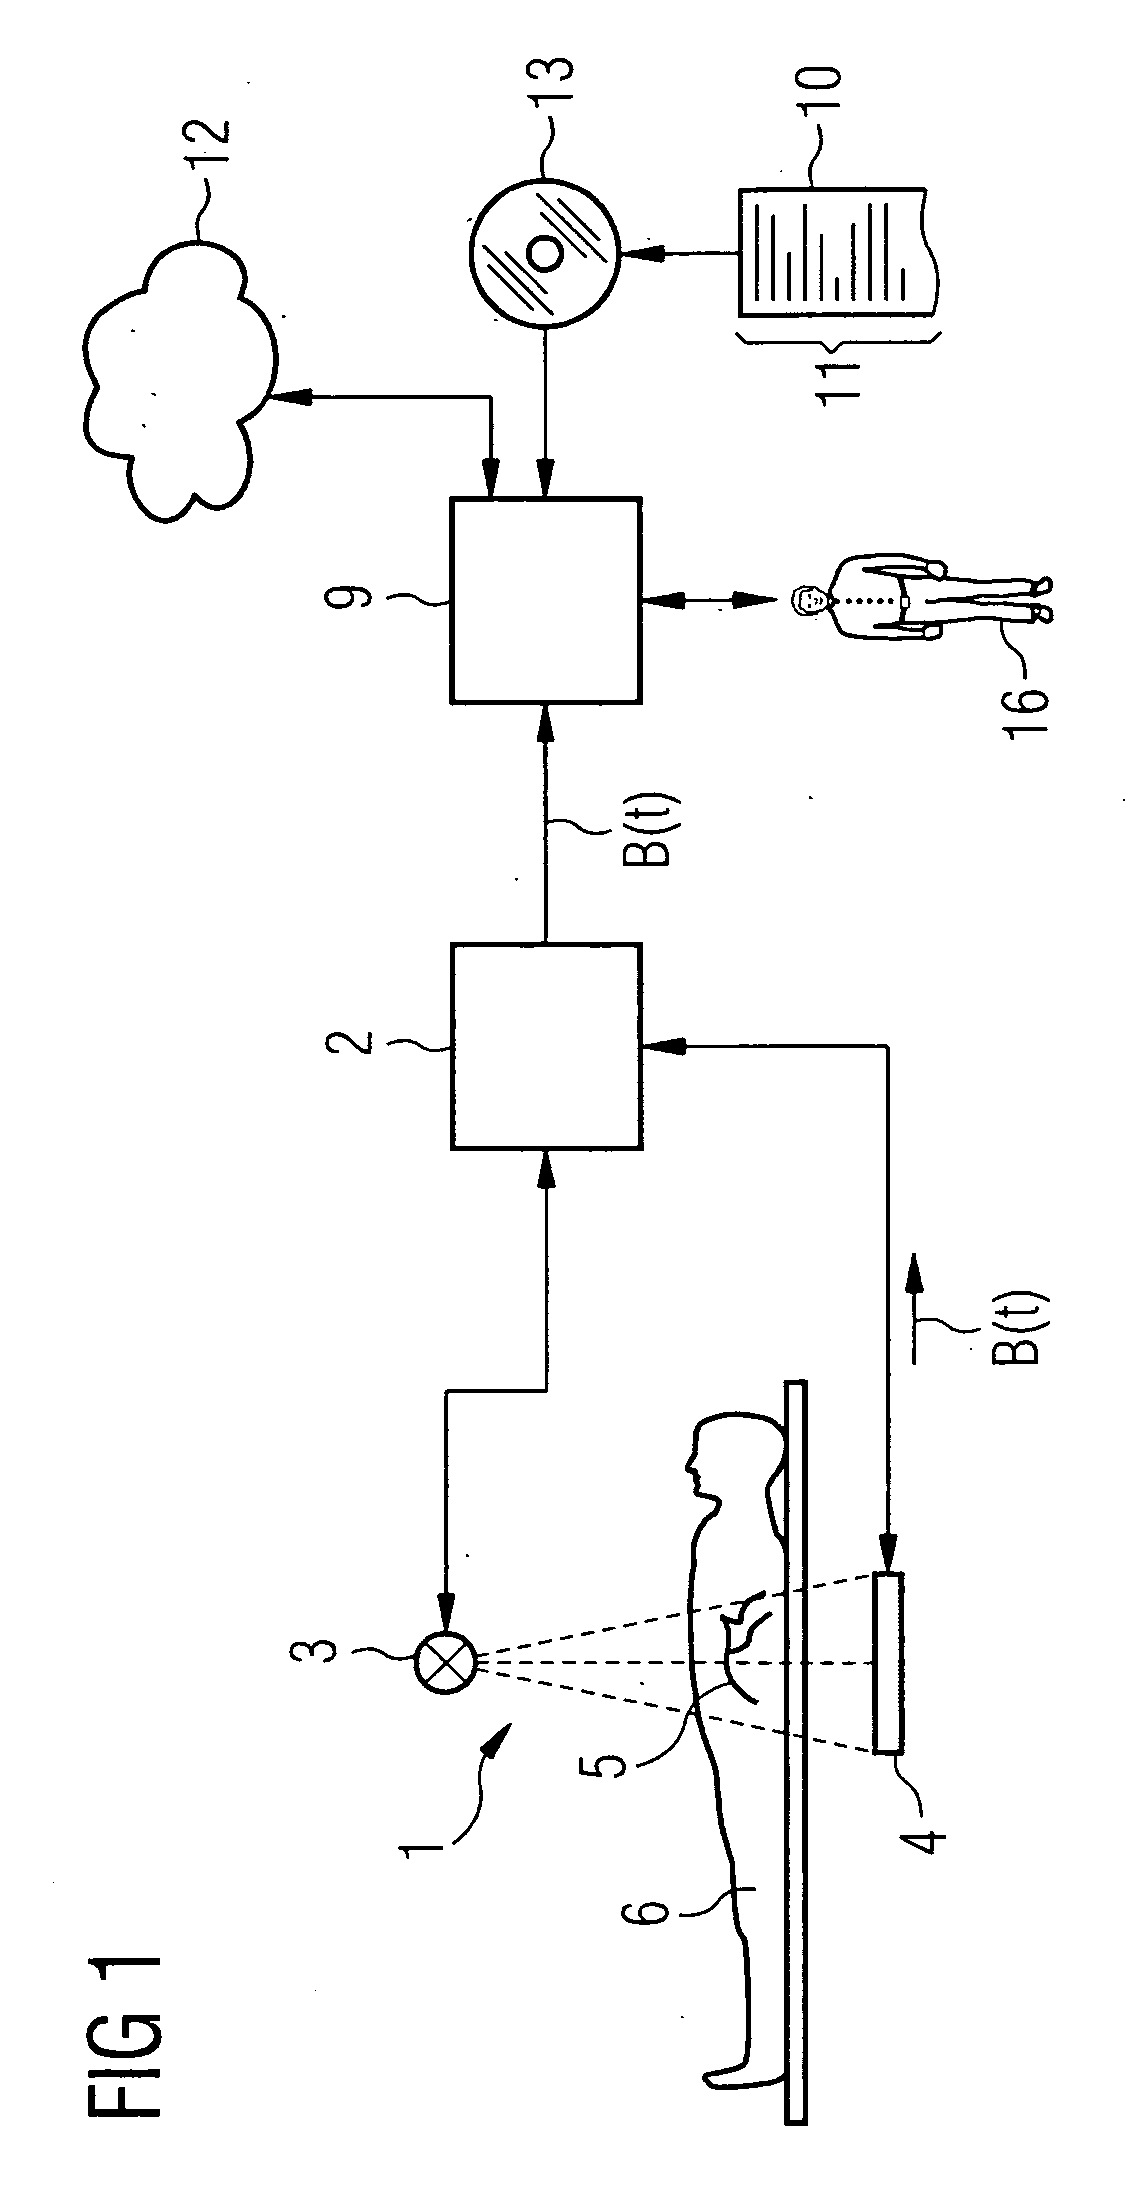 Registration method with three-dimensional representation of a vascular tree as a function of blood flow